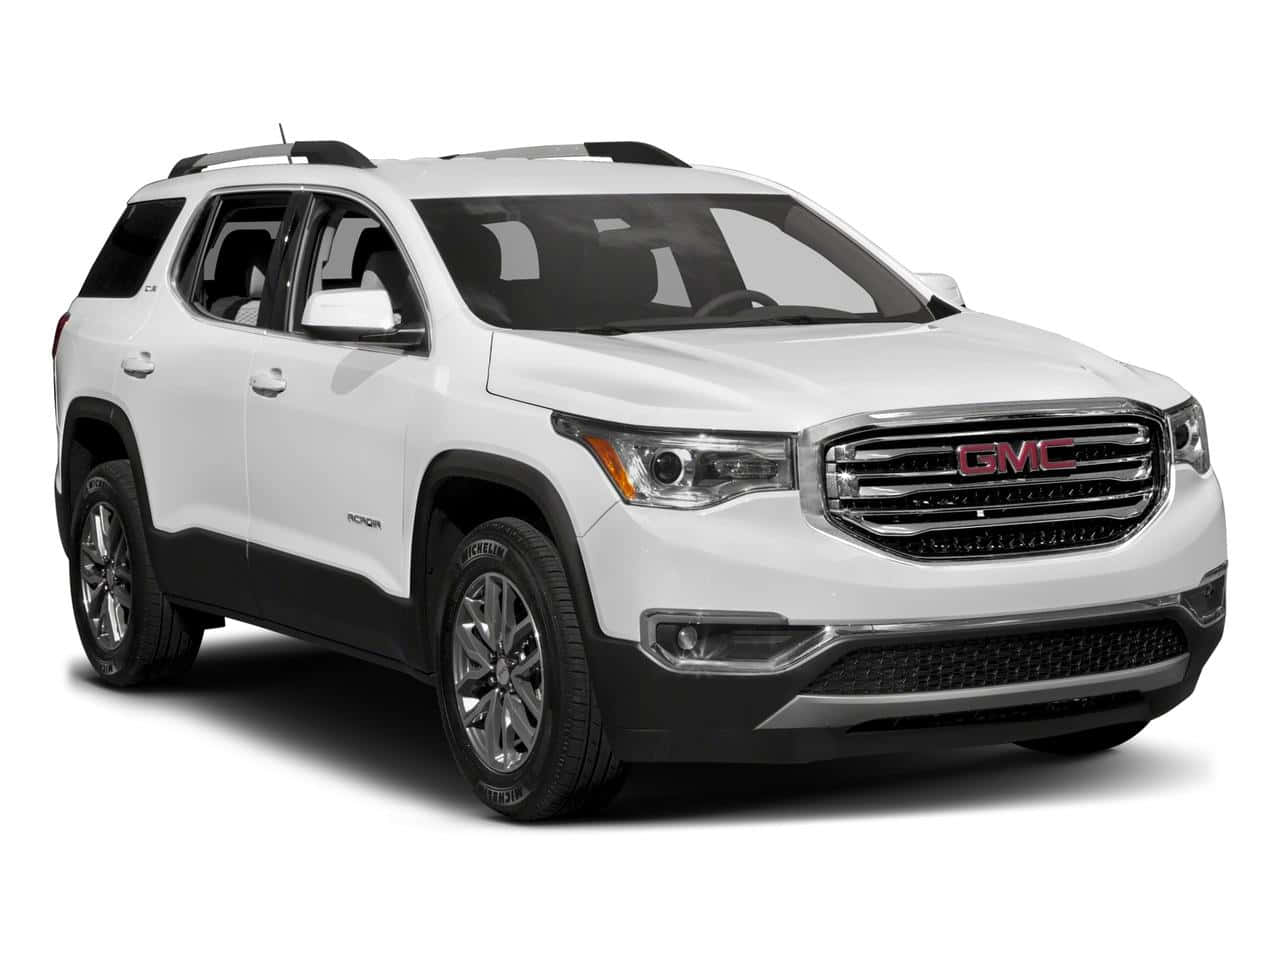 GMC Acadia driving through a scenic route Wallpaper